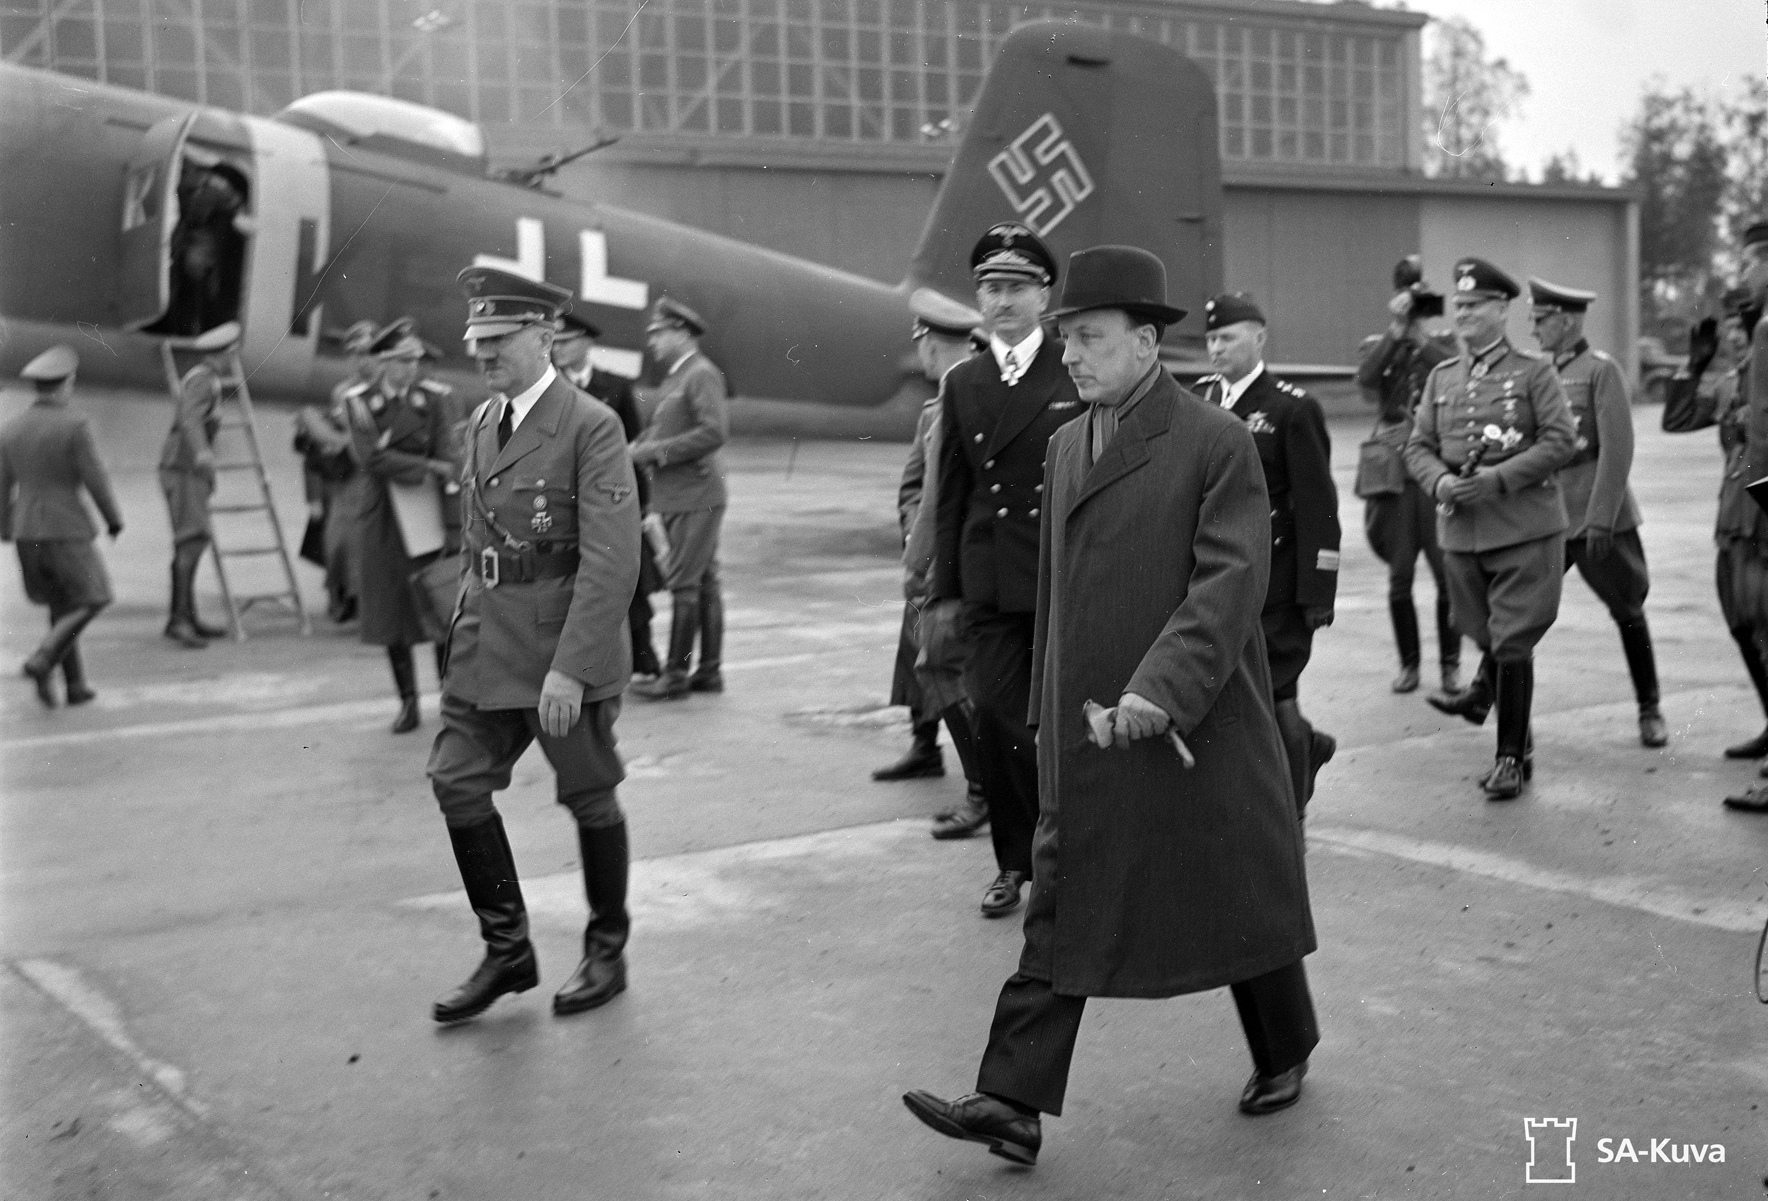 Adolf Hitler at his arrival in Finland in front of his Focke-Wulf Fw 200 Condor